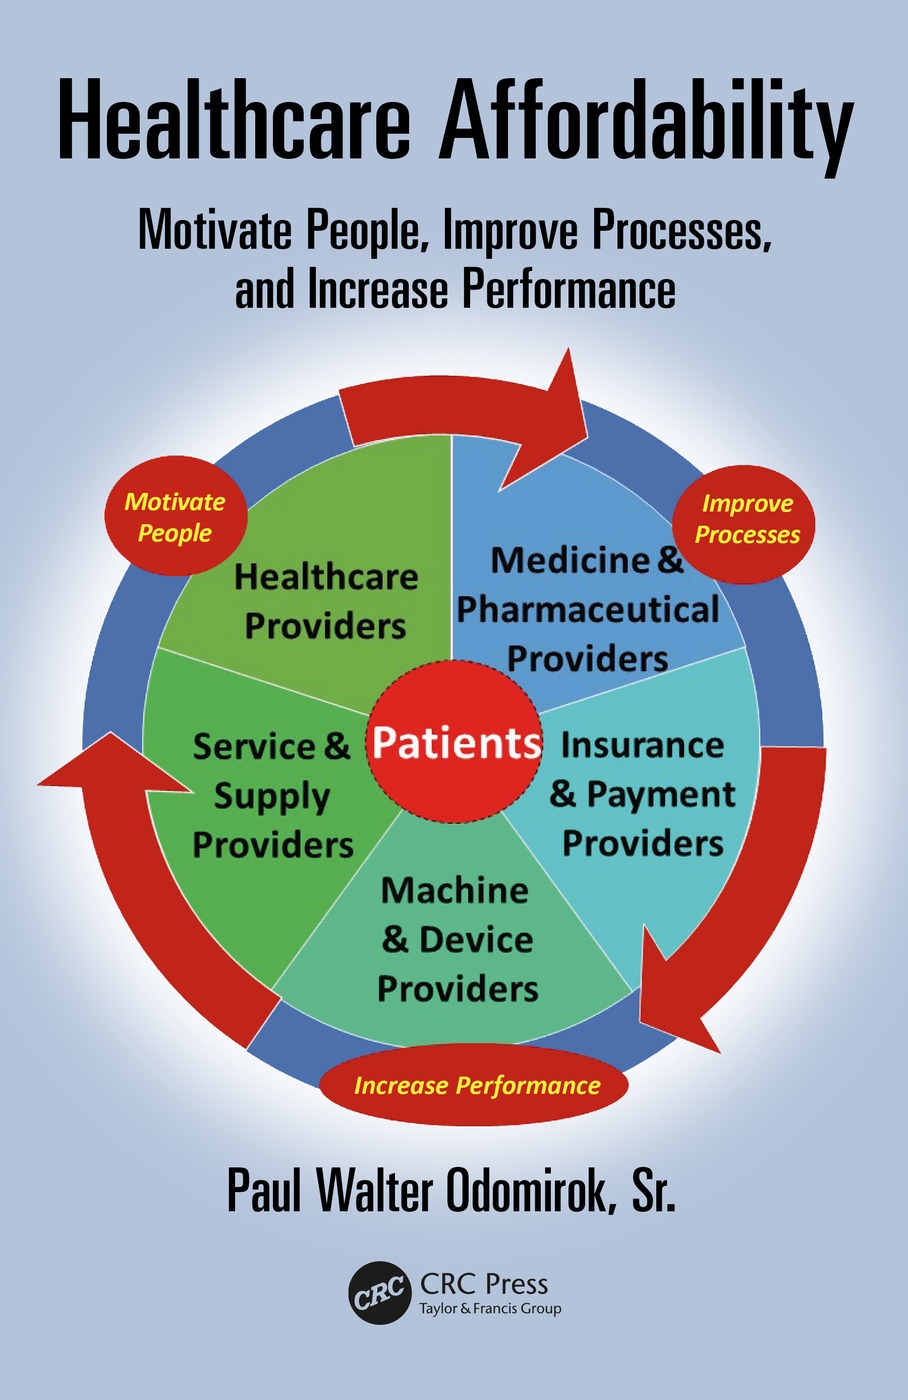 Healthcare Affordability: Motivate People, Improve Processes, and Increase Performance